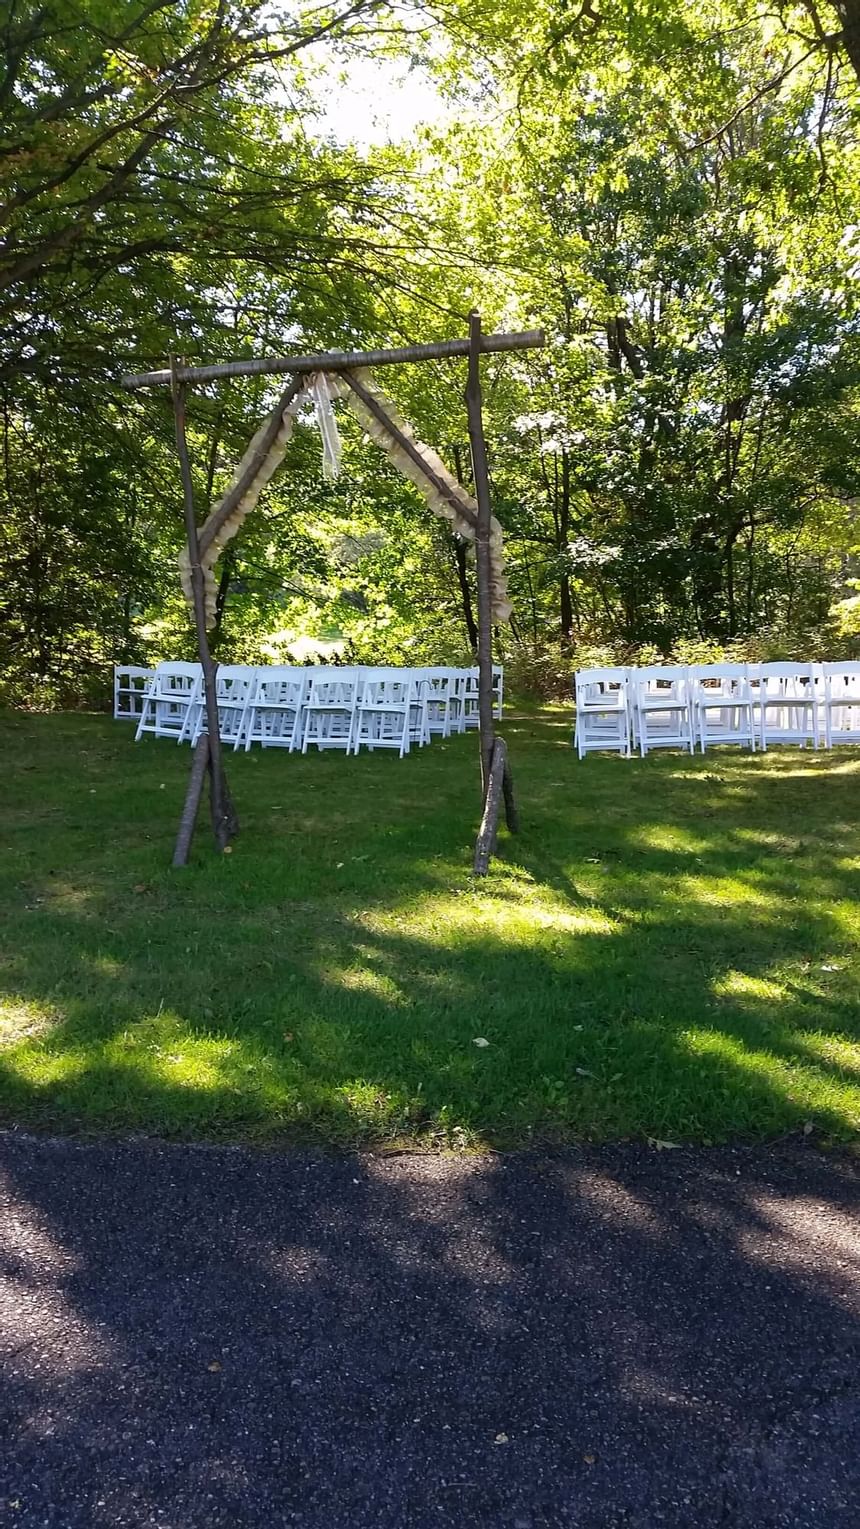 Chairs & decorations arranged in the shades at Evergreen Resort